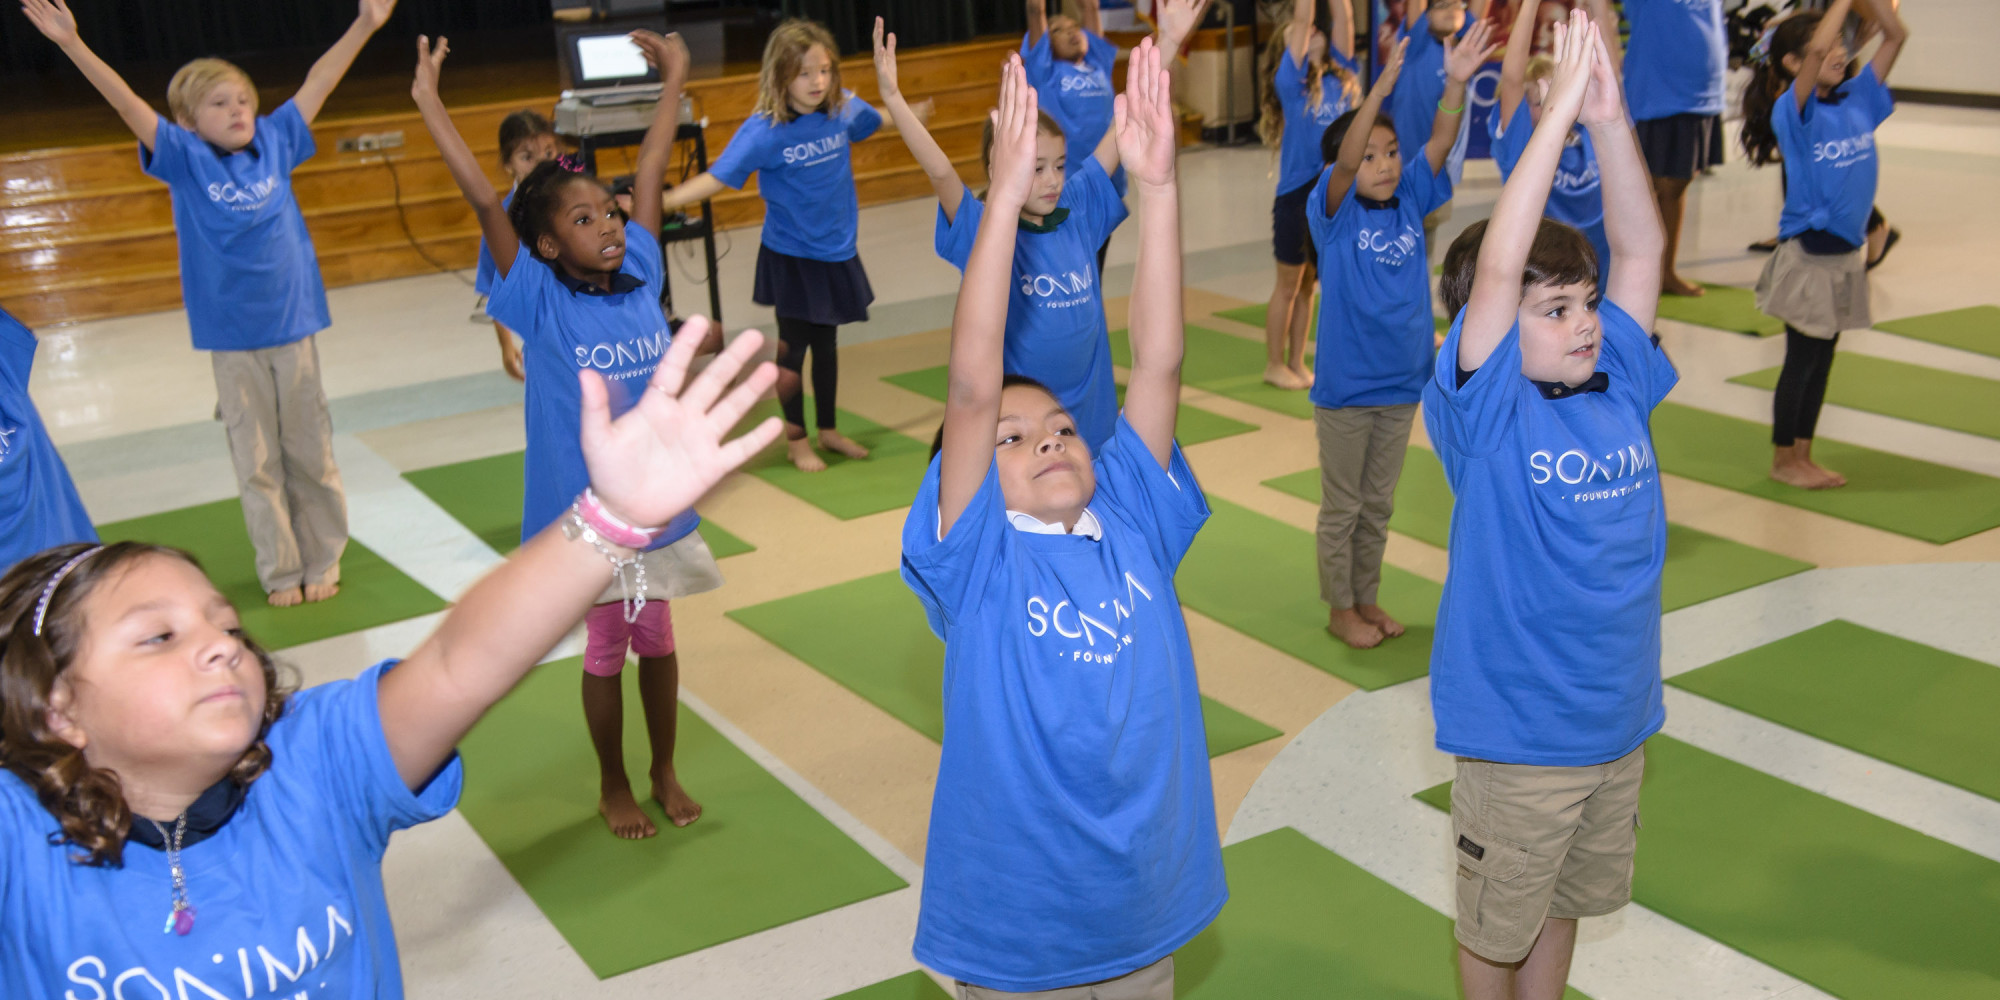 How Yoga Could Change The Lives Of Students In One Low-Income Community